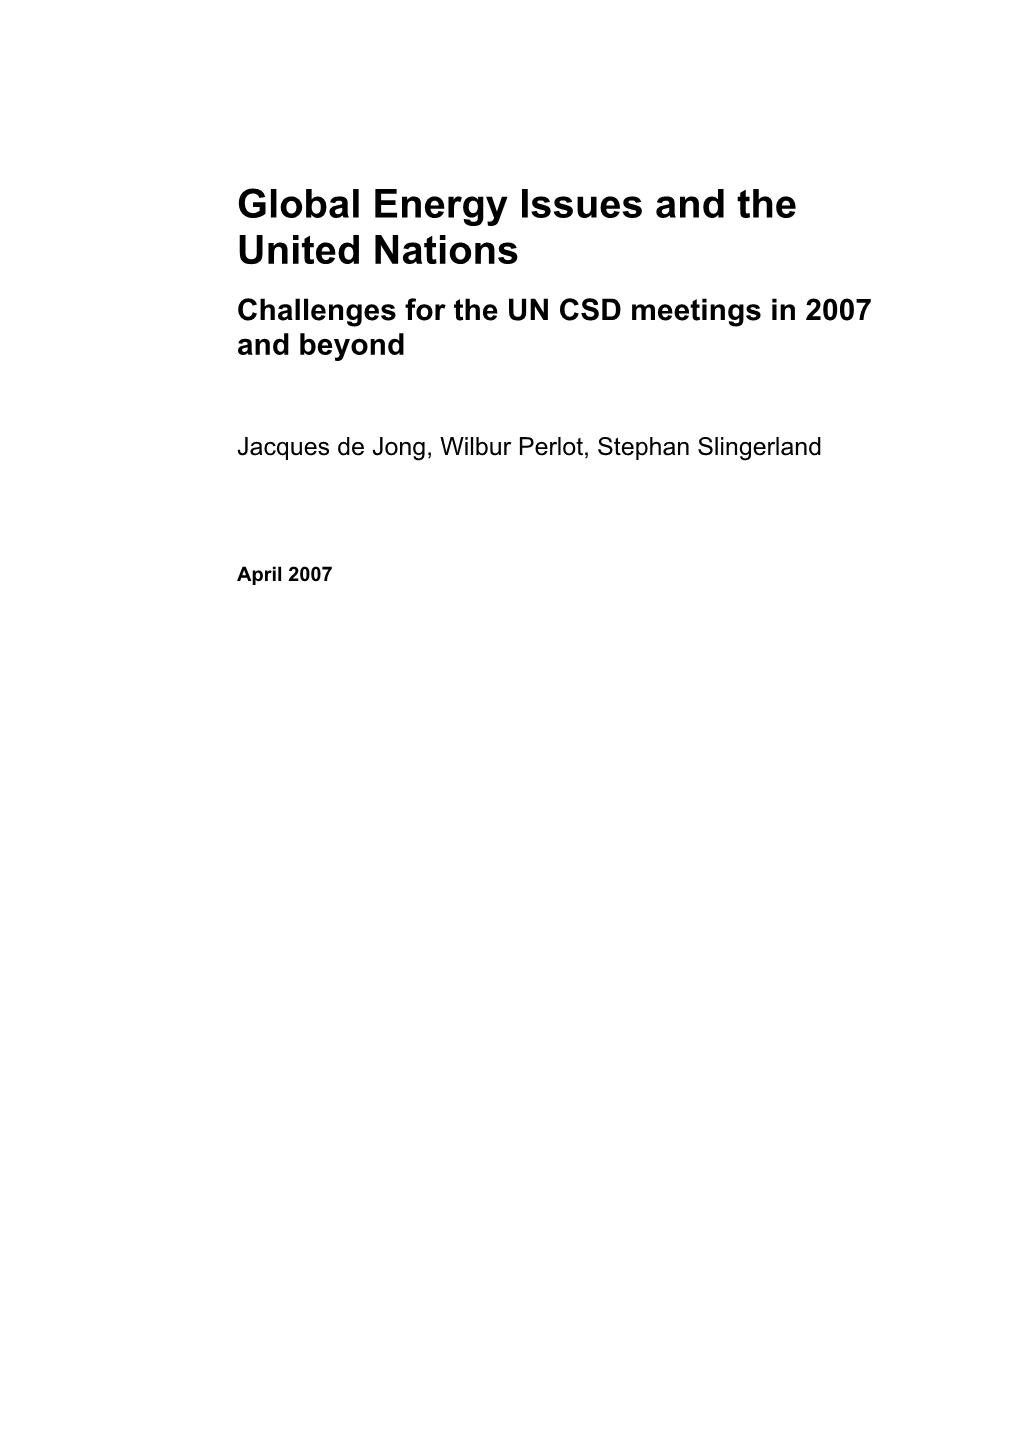 Global Energy Issues and the United Nations Challenges for the UN CSD Meetings in 2007 and Beyond